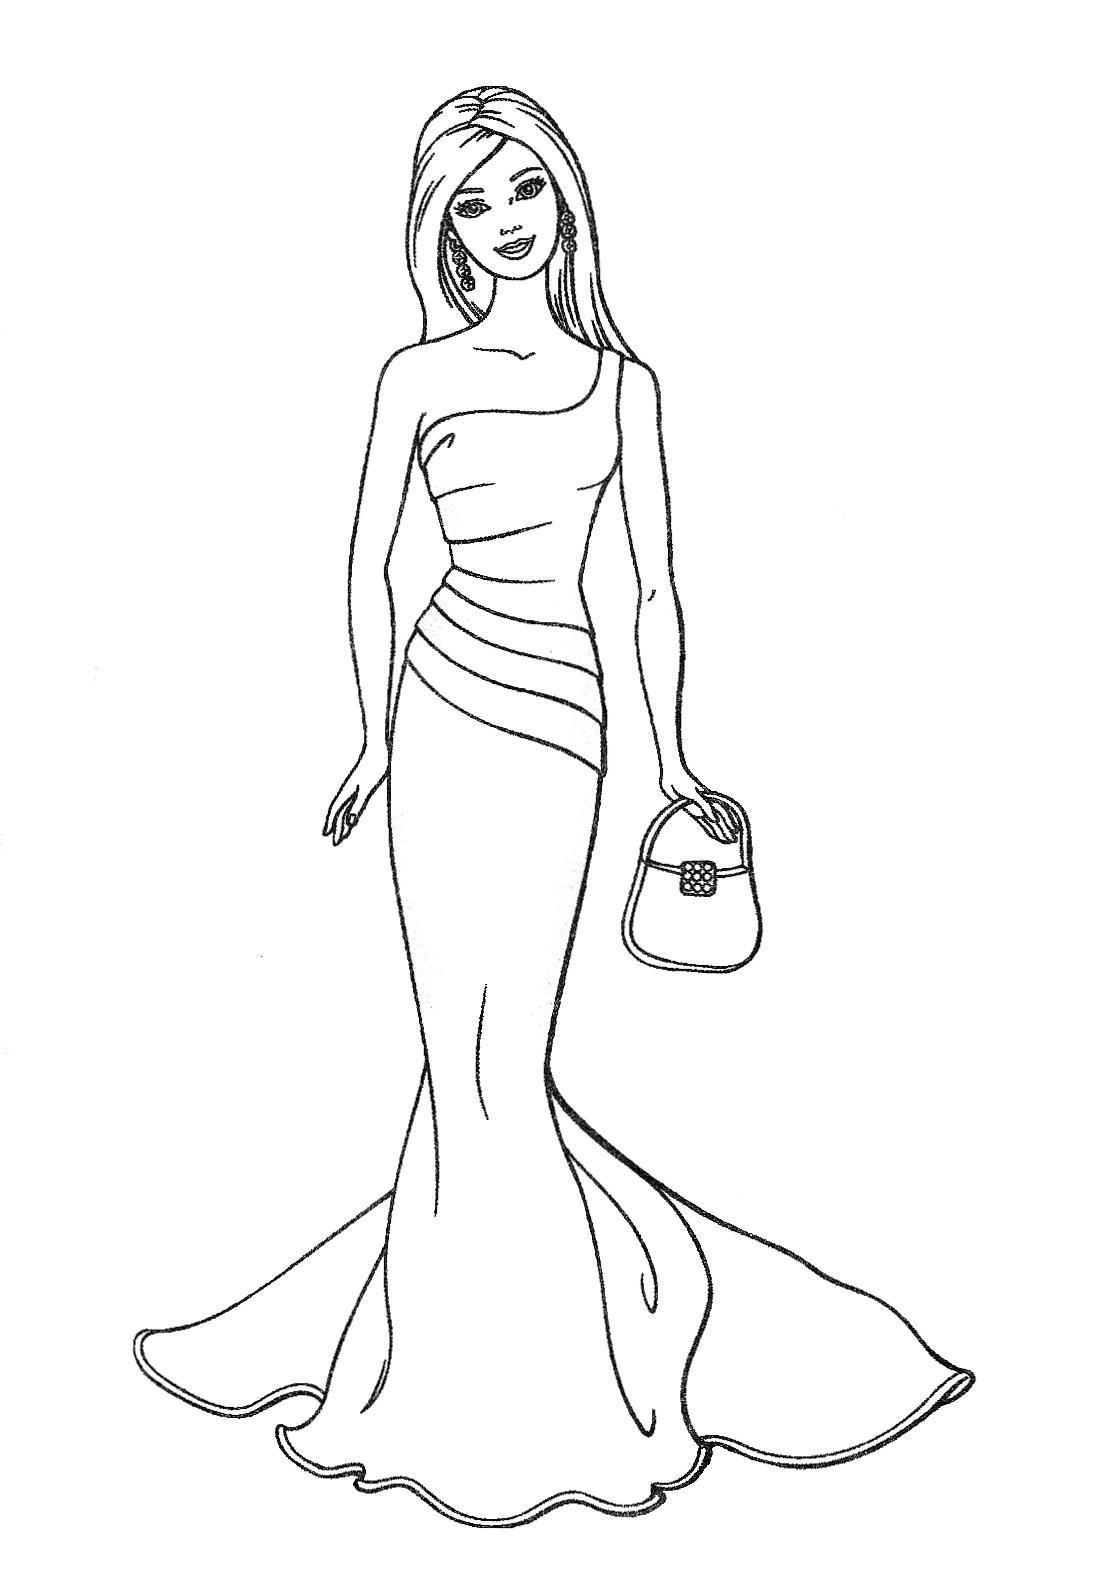 Free Printable Barbie Coloring Pages For Kids HD Wallpapers Download Free Images Wallpaper [wallpaper896.blogspot.com]